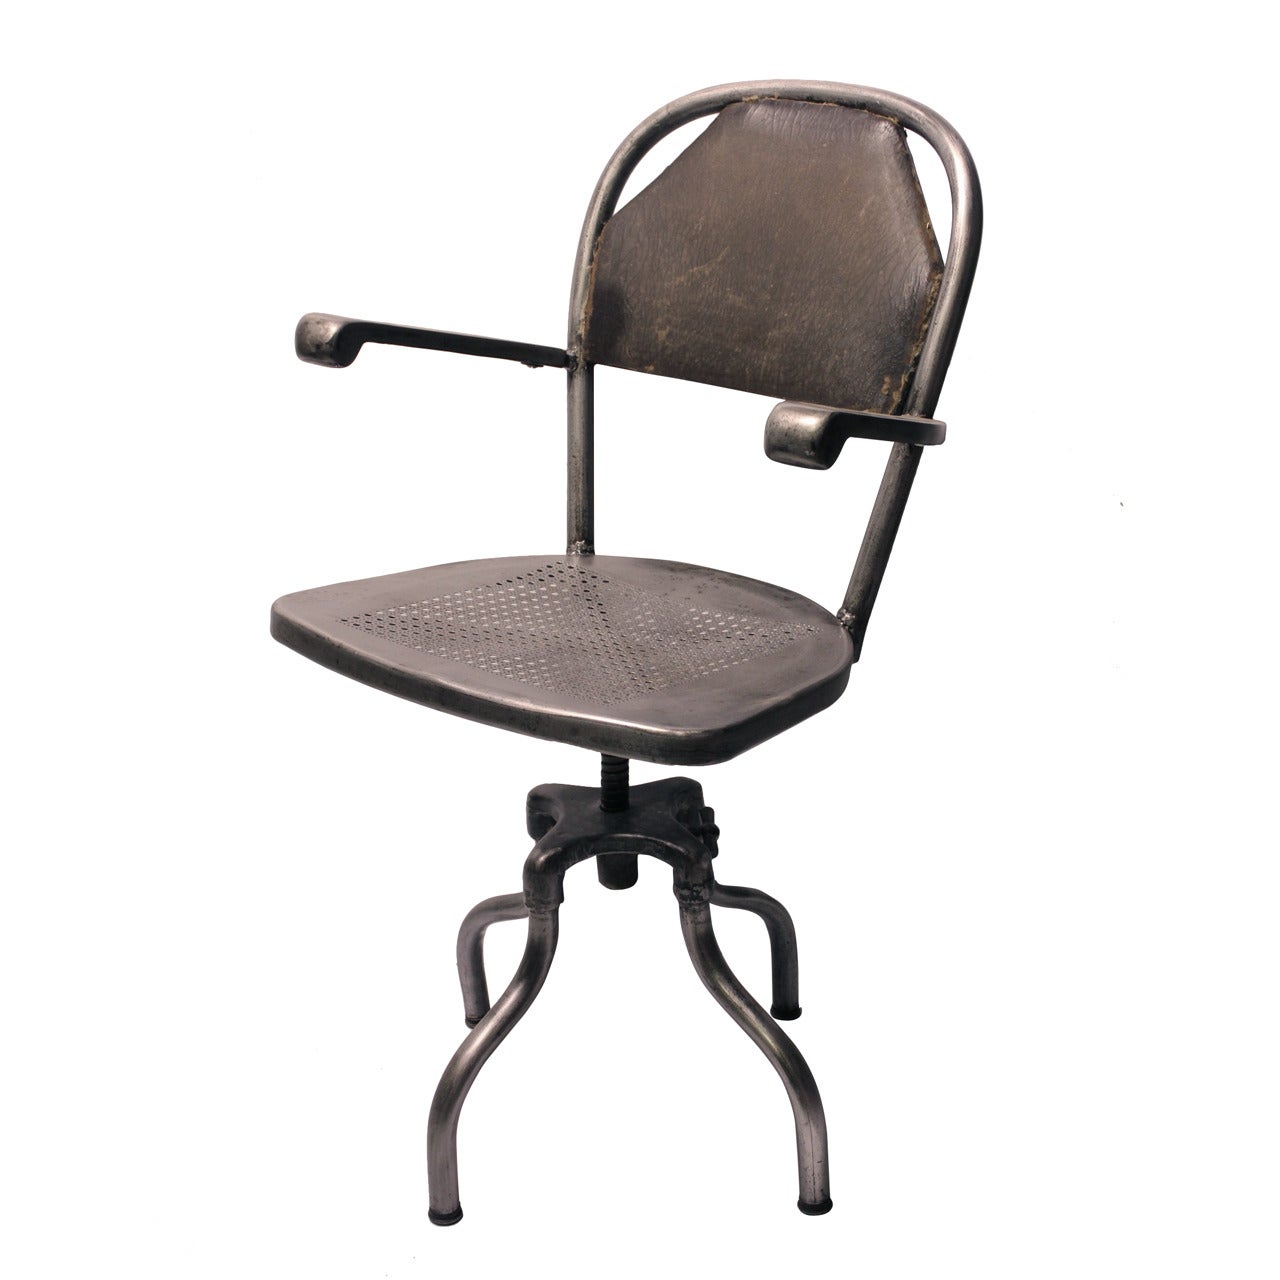 1930's Industrial Metal Desk Chair For Sale